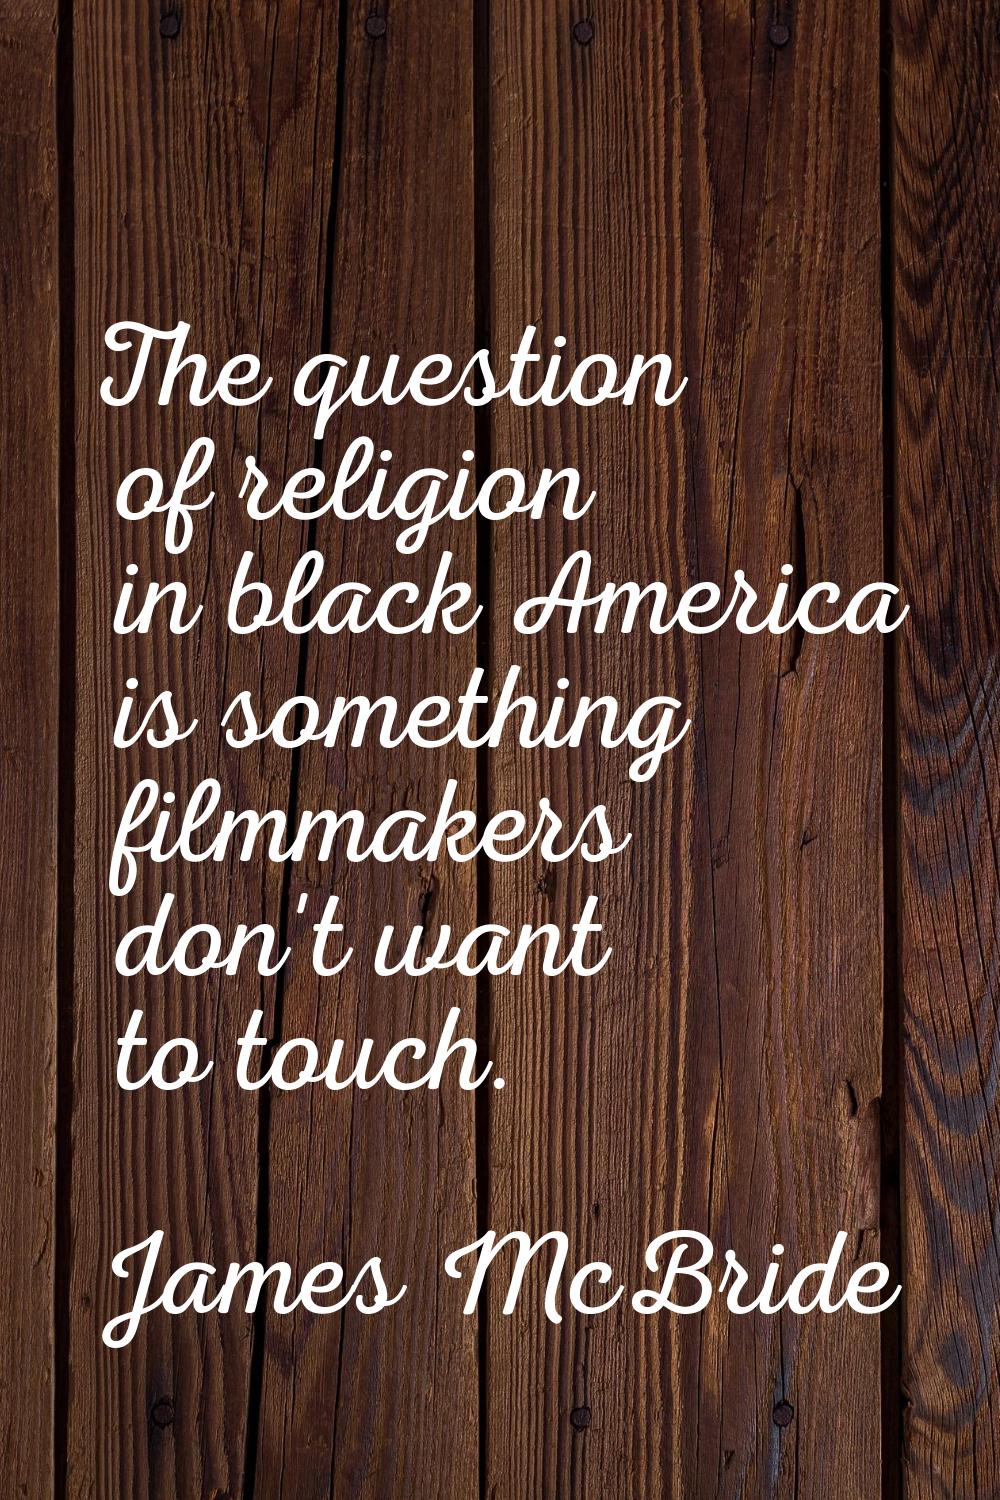 The question of religion in black America is something filmmakers don't want to touch.